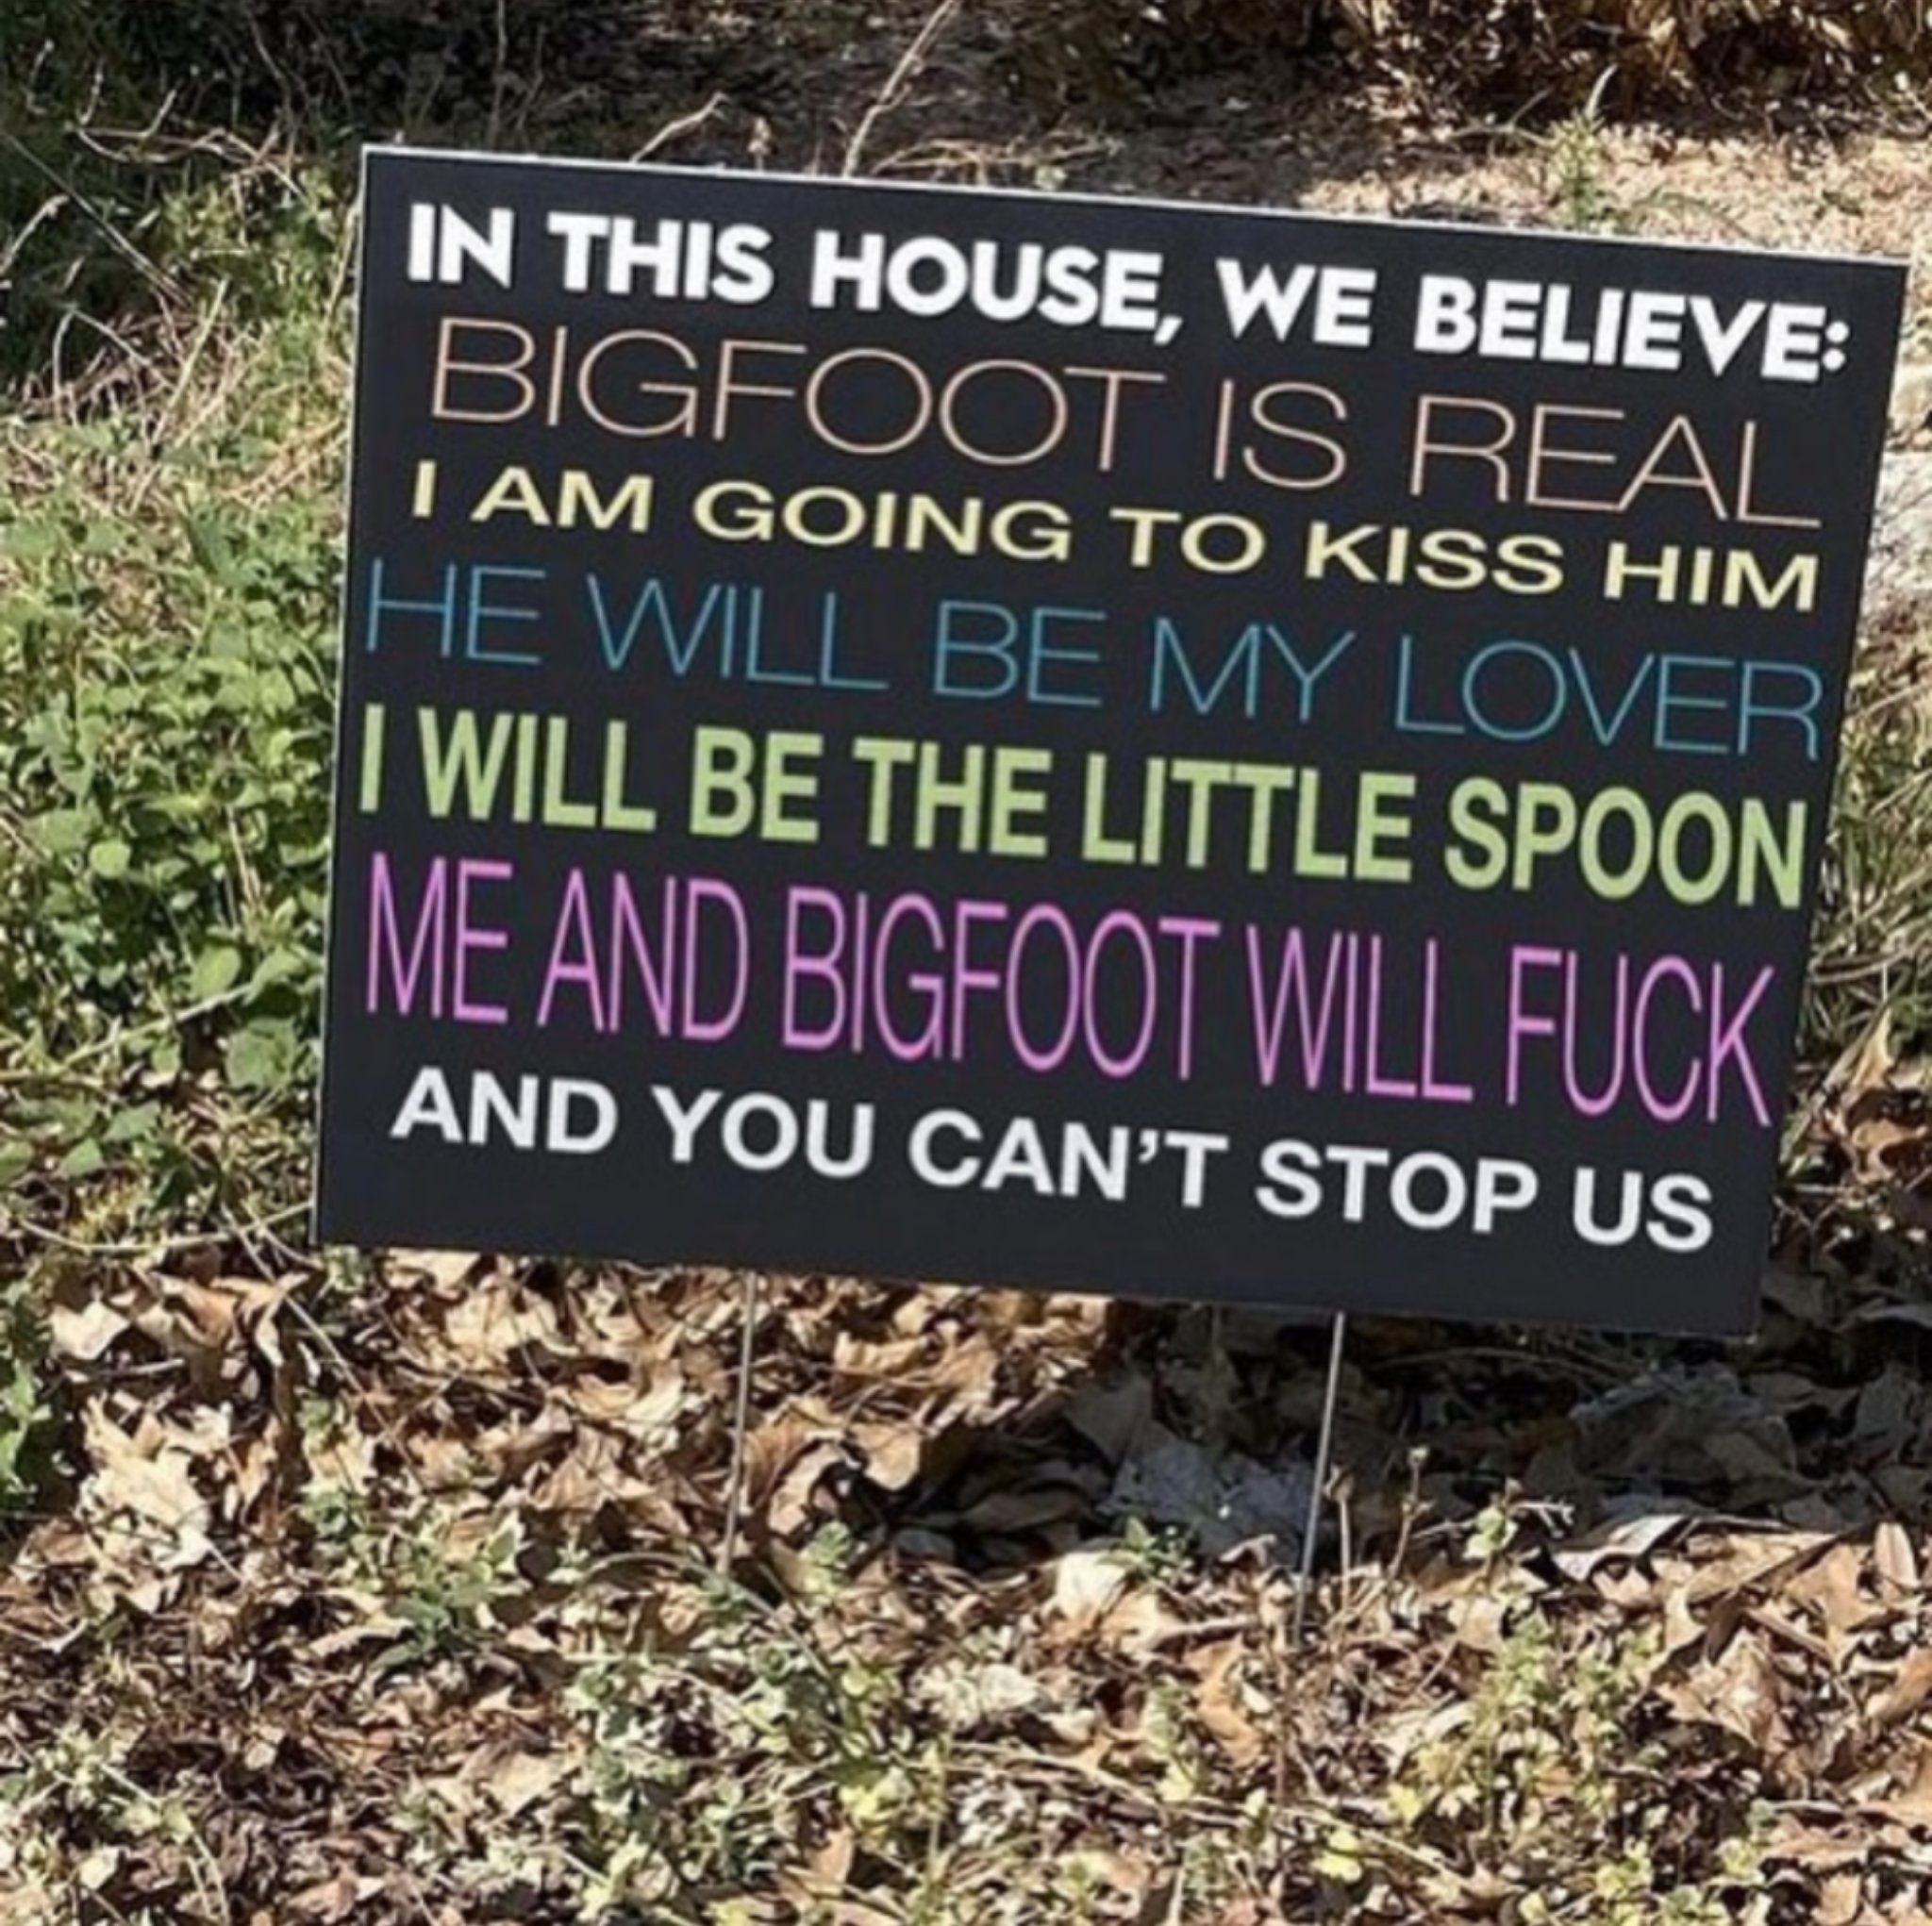 HI-RES] IN THIS HOUSE, WE BELIEVE: BIGFOOT IS REAL I AM GOING TO